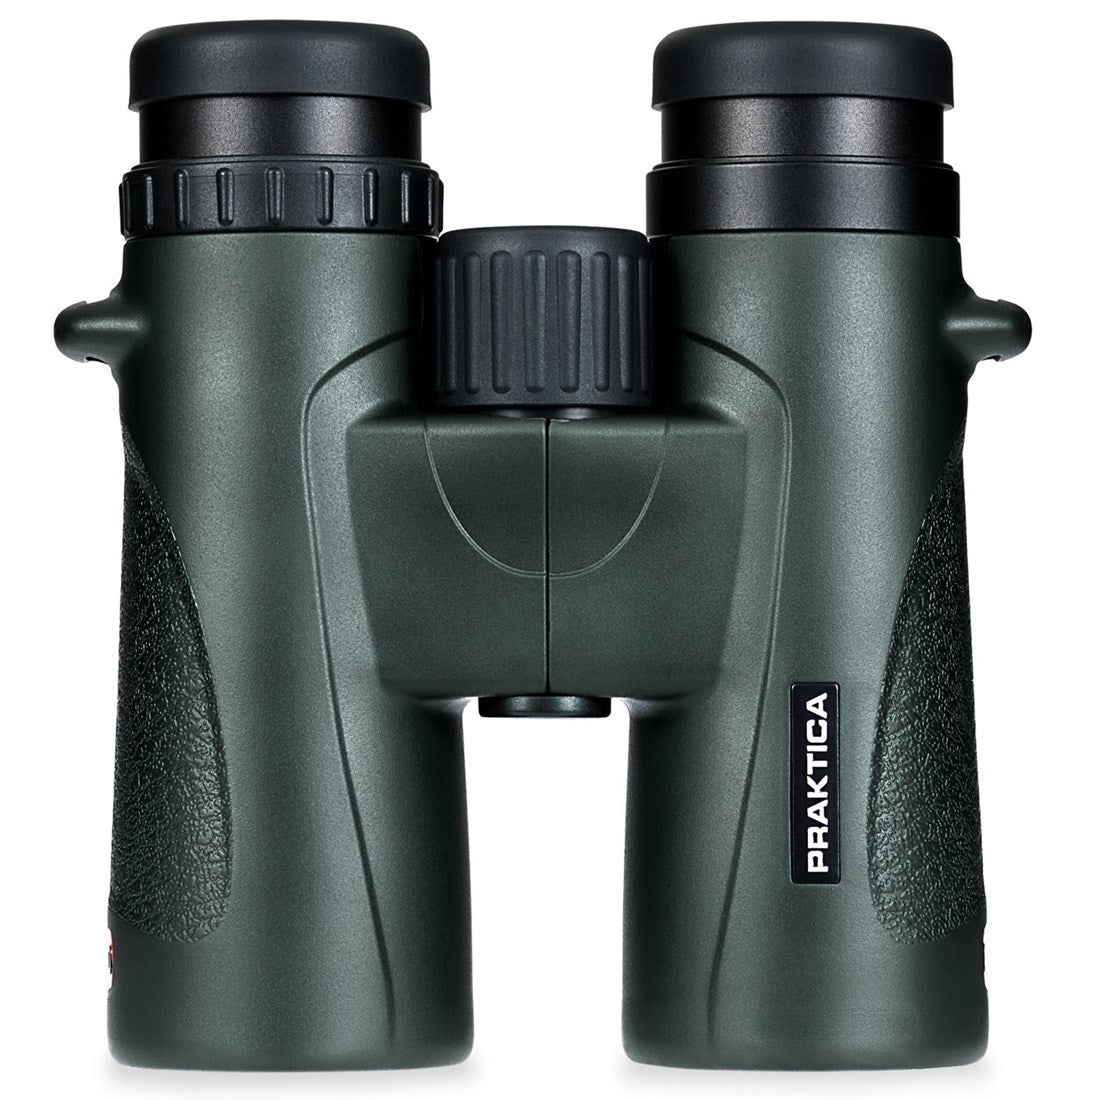 Product Image of Clearance Praktica Marquis 8x42mm Waterproof Binoculars with ED Glass - Green